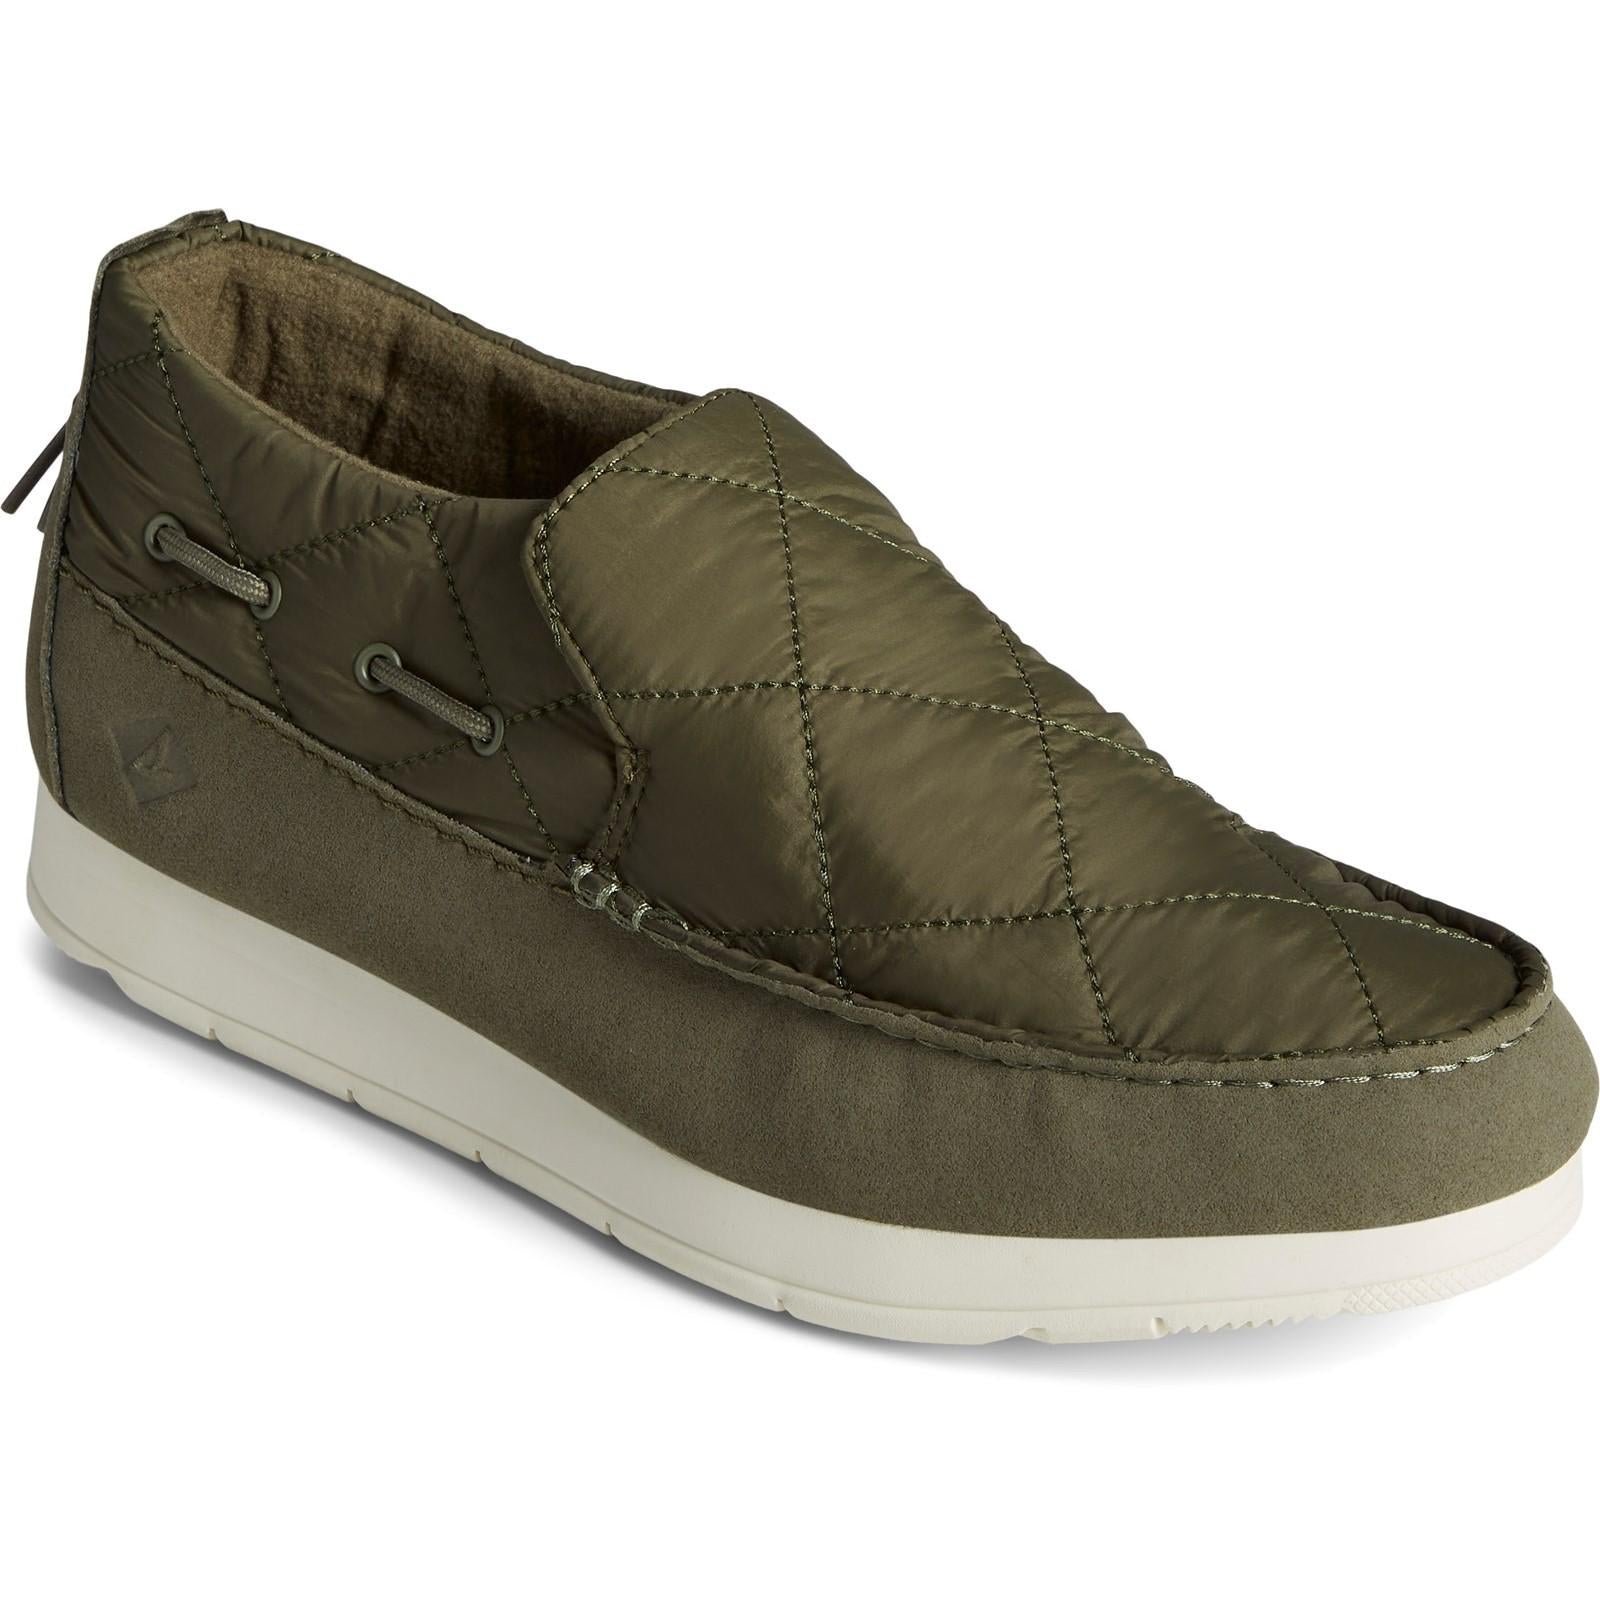 Sperry Top-sider Moc Sider Shoes